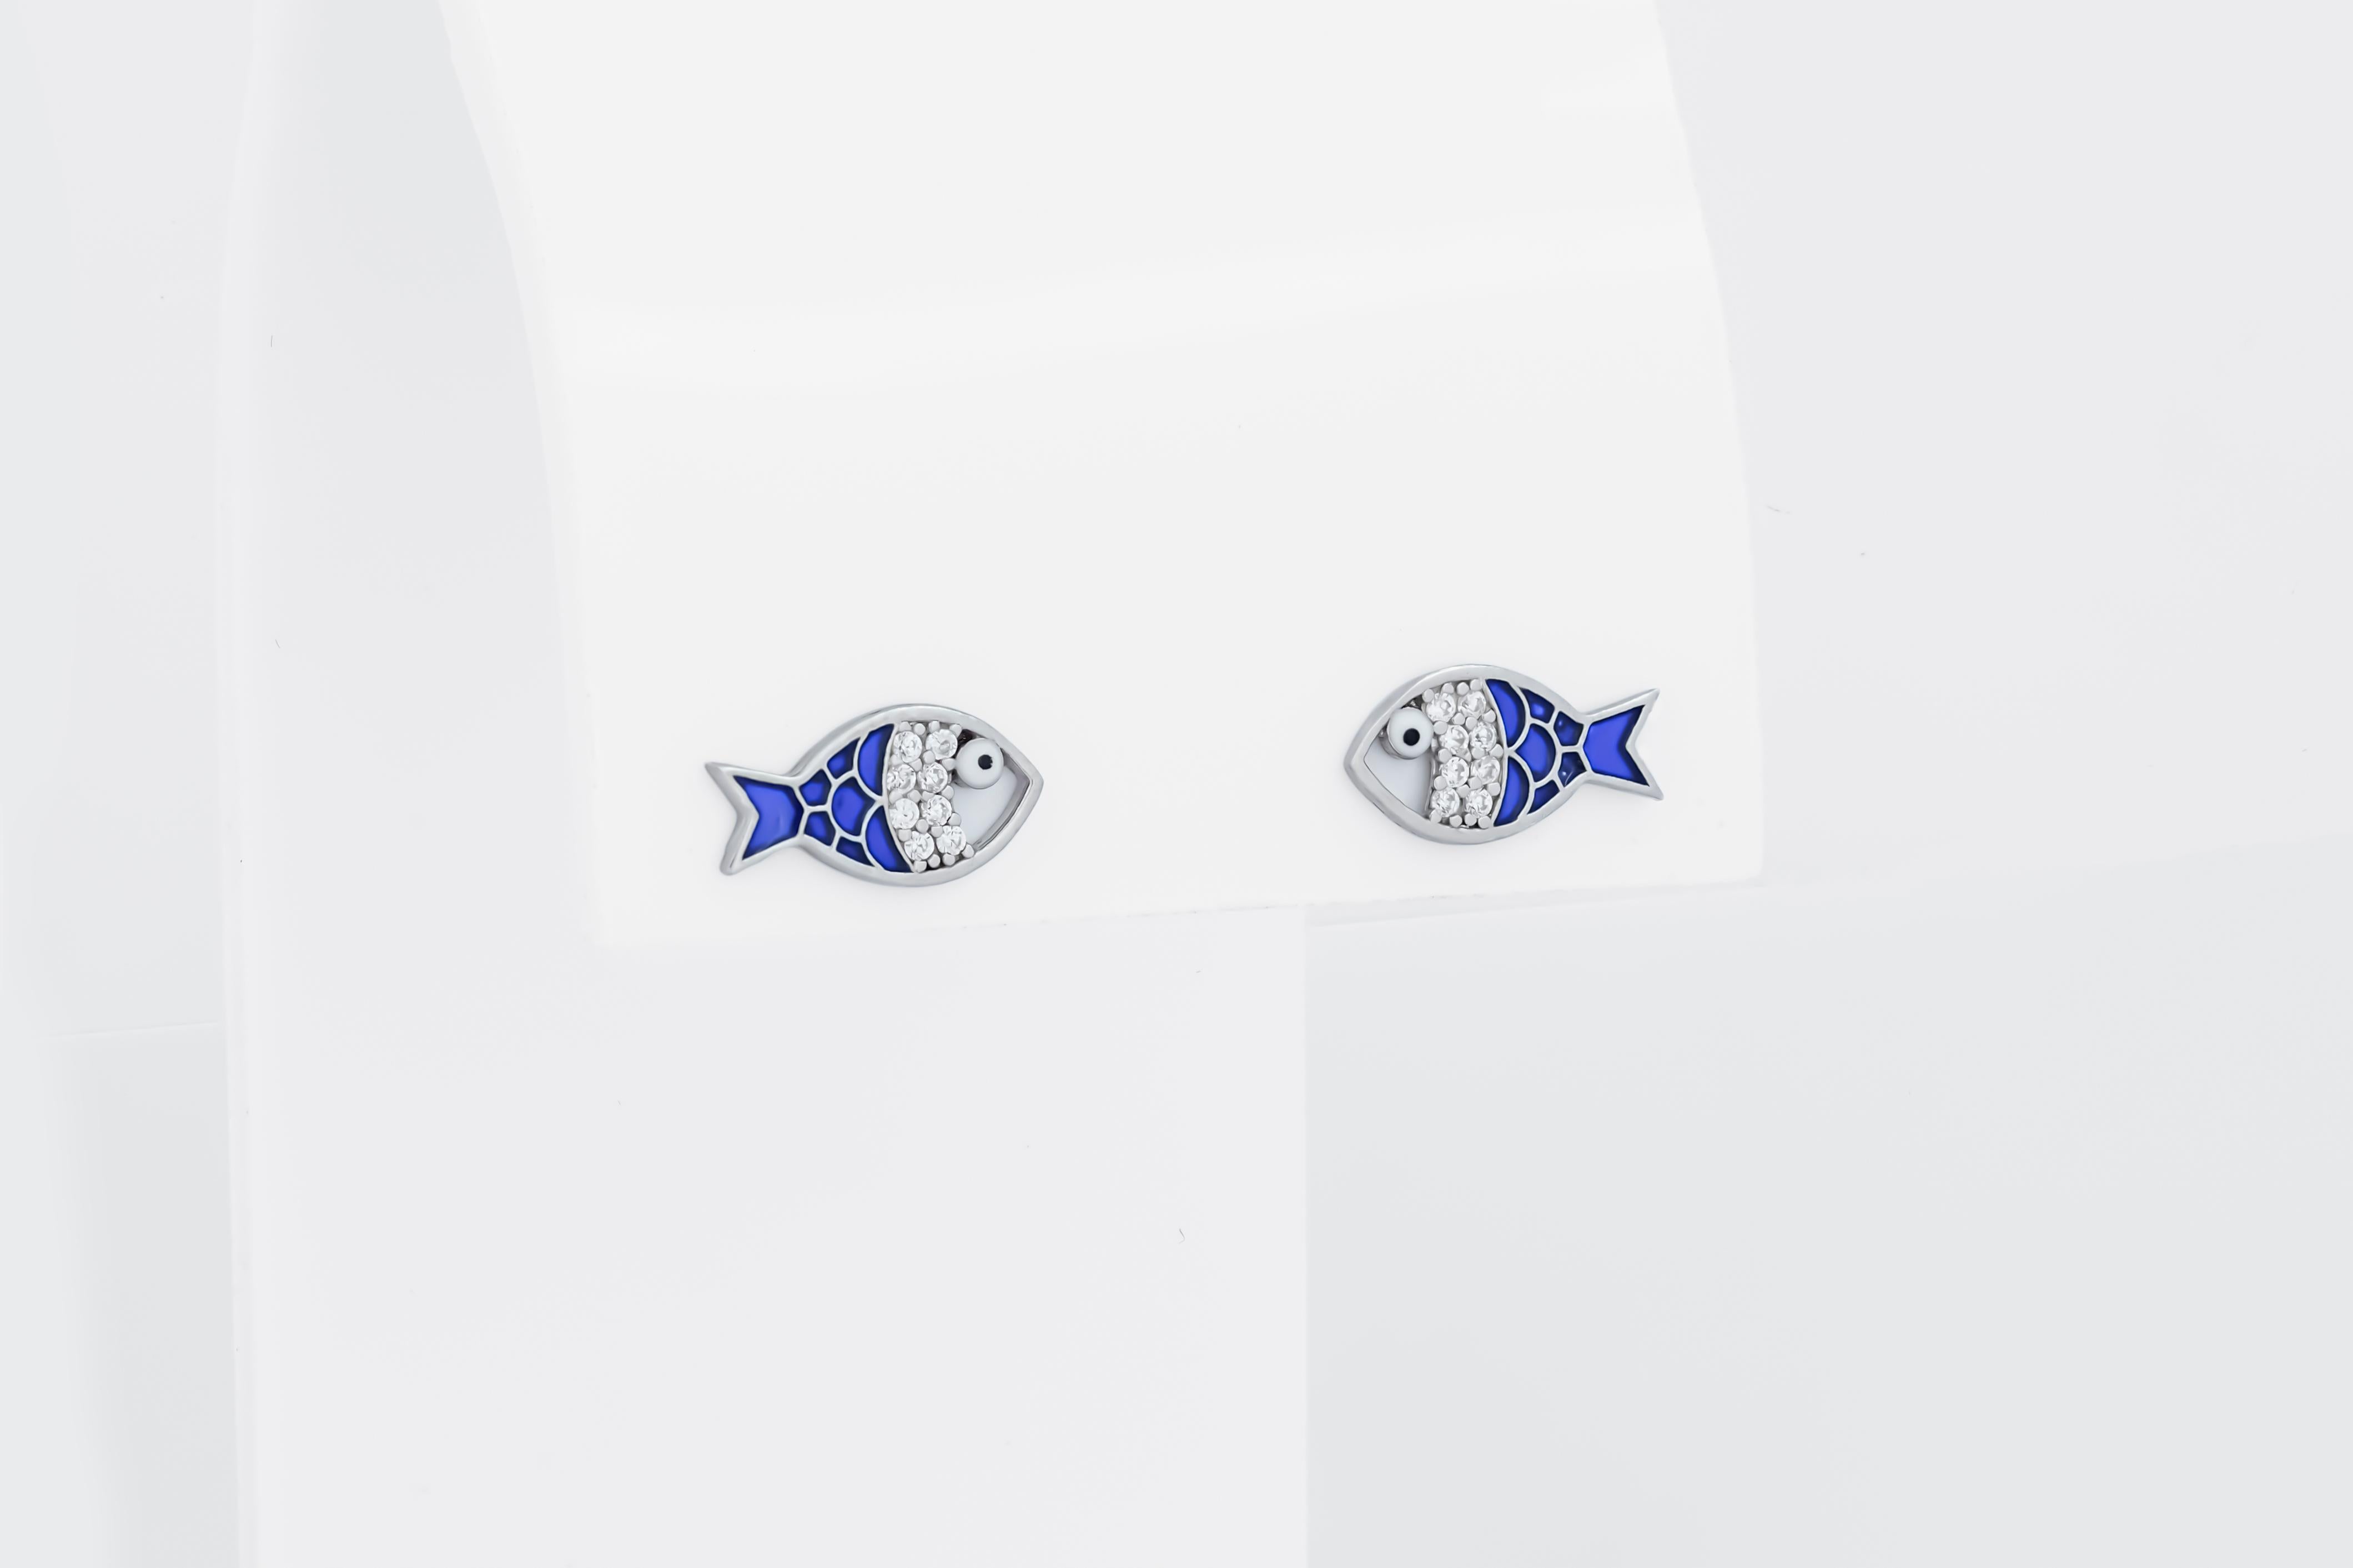 Women's Fish earrings with moissanites and blue enamel in 14k gold. For Sale